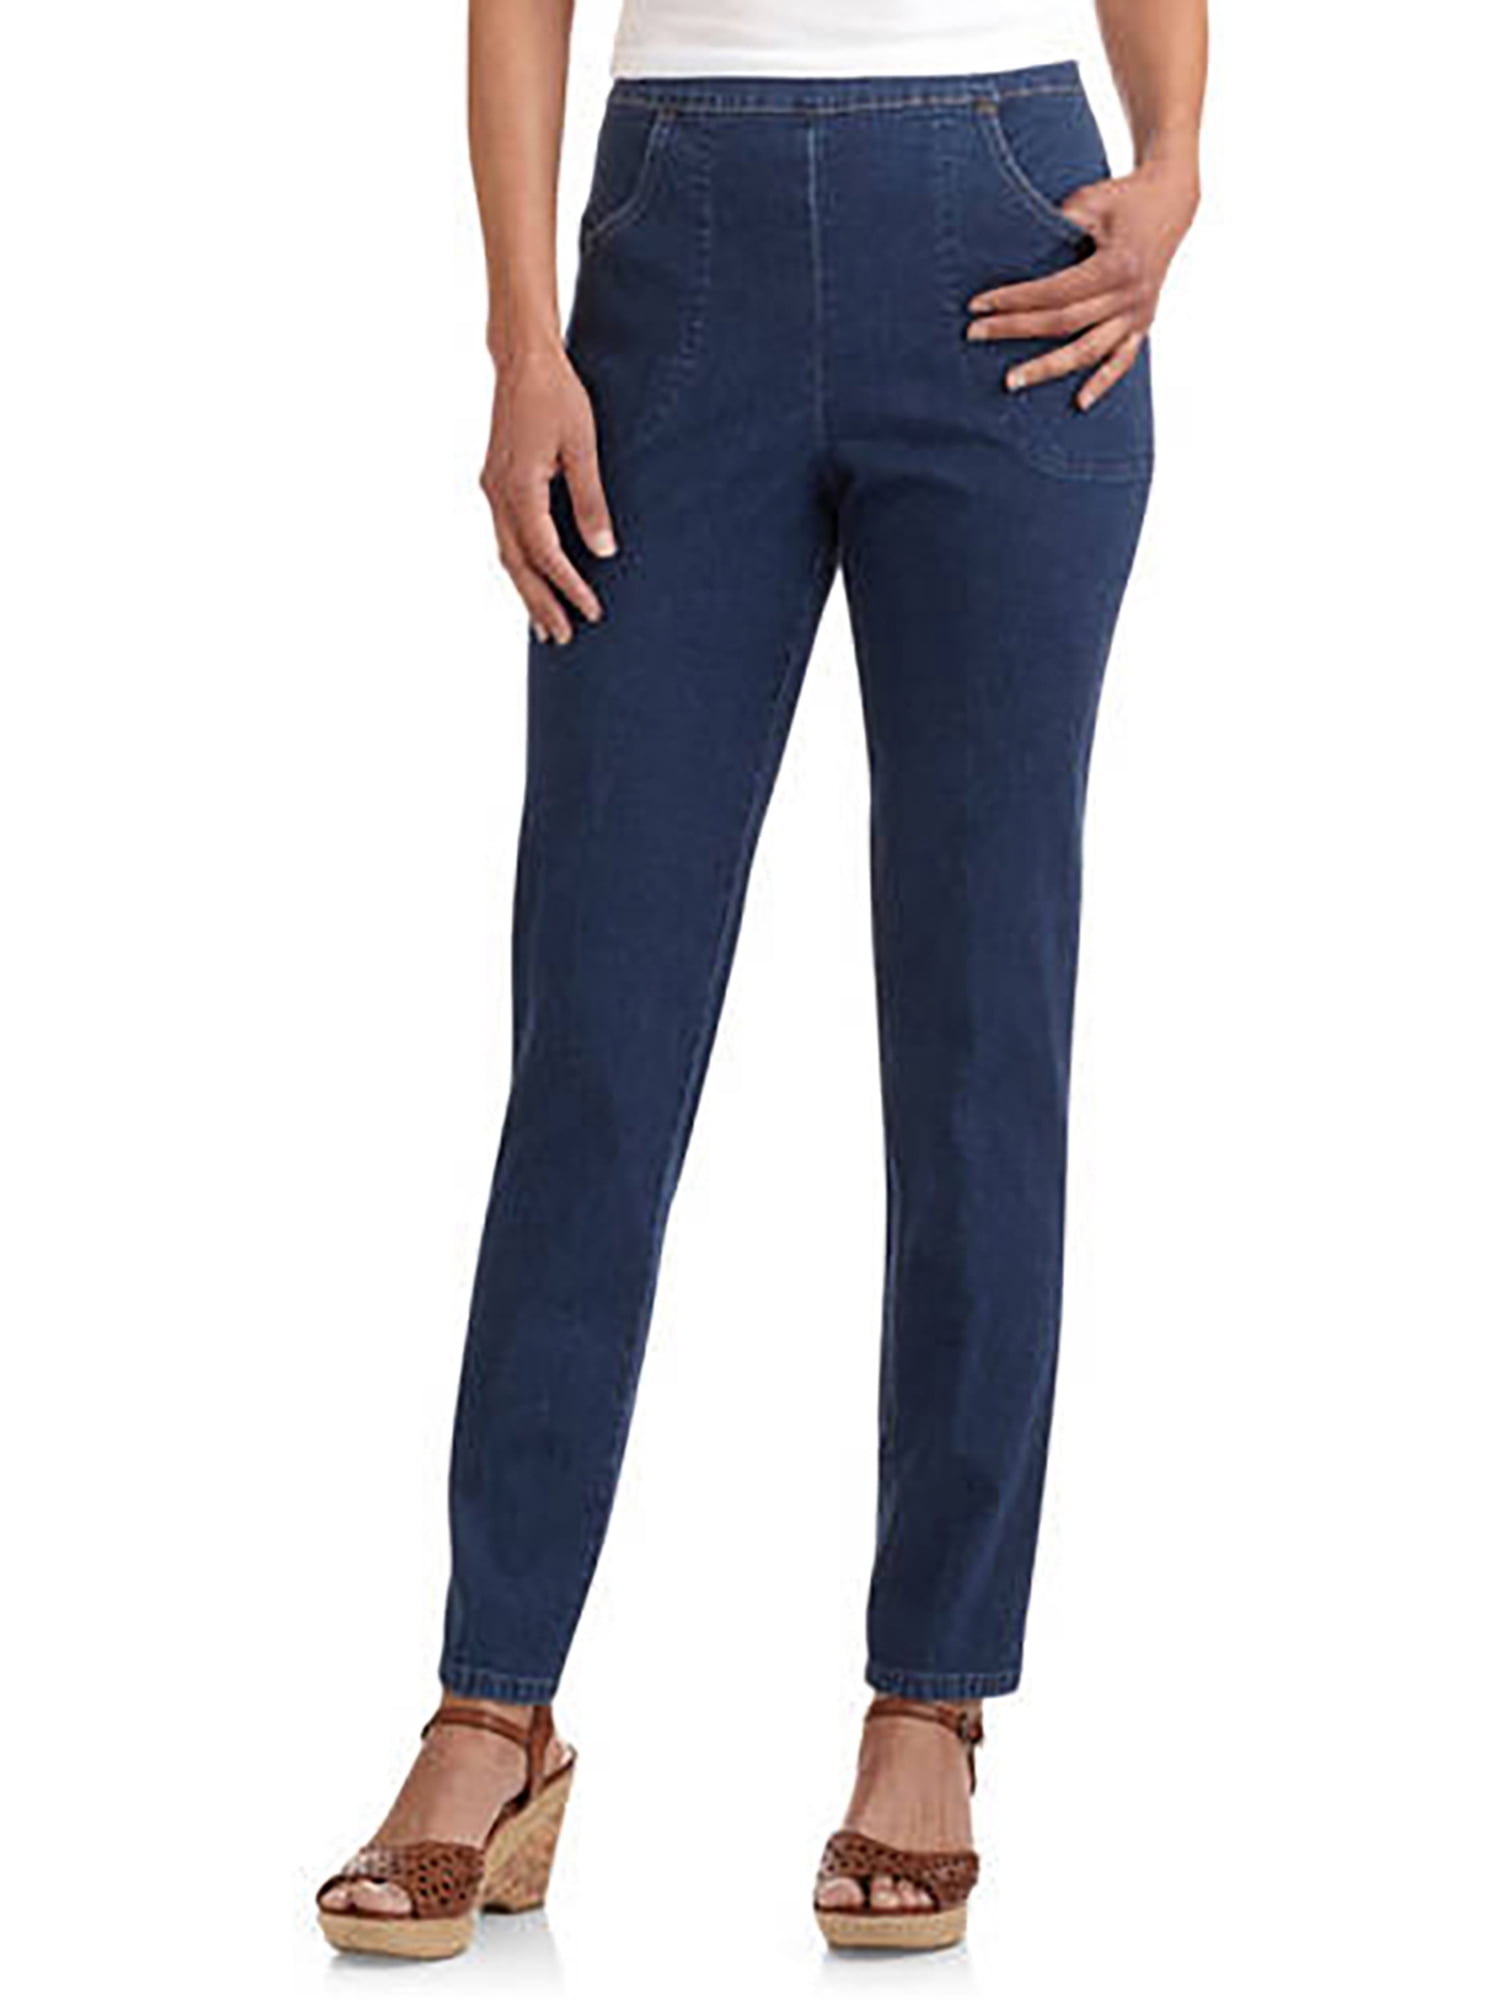 Realsize Women's Stretch Pull On Pants with Pockets